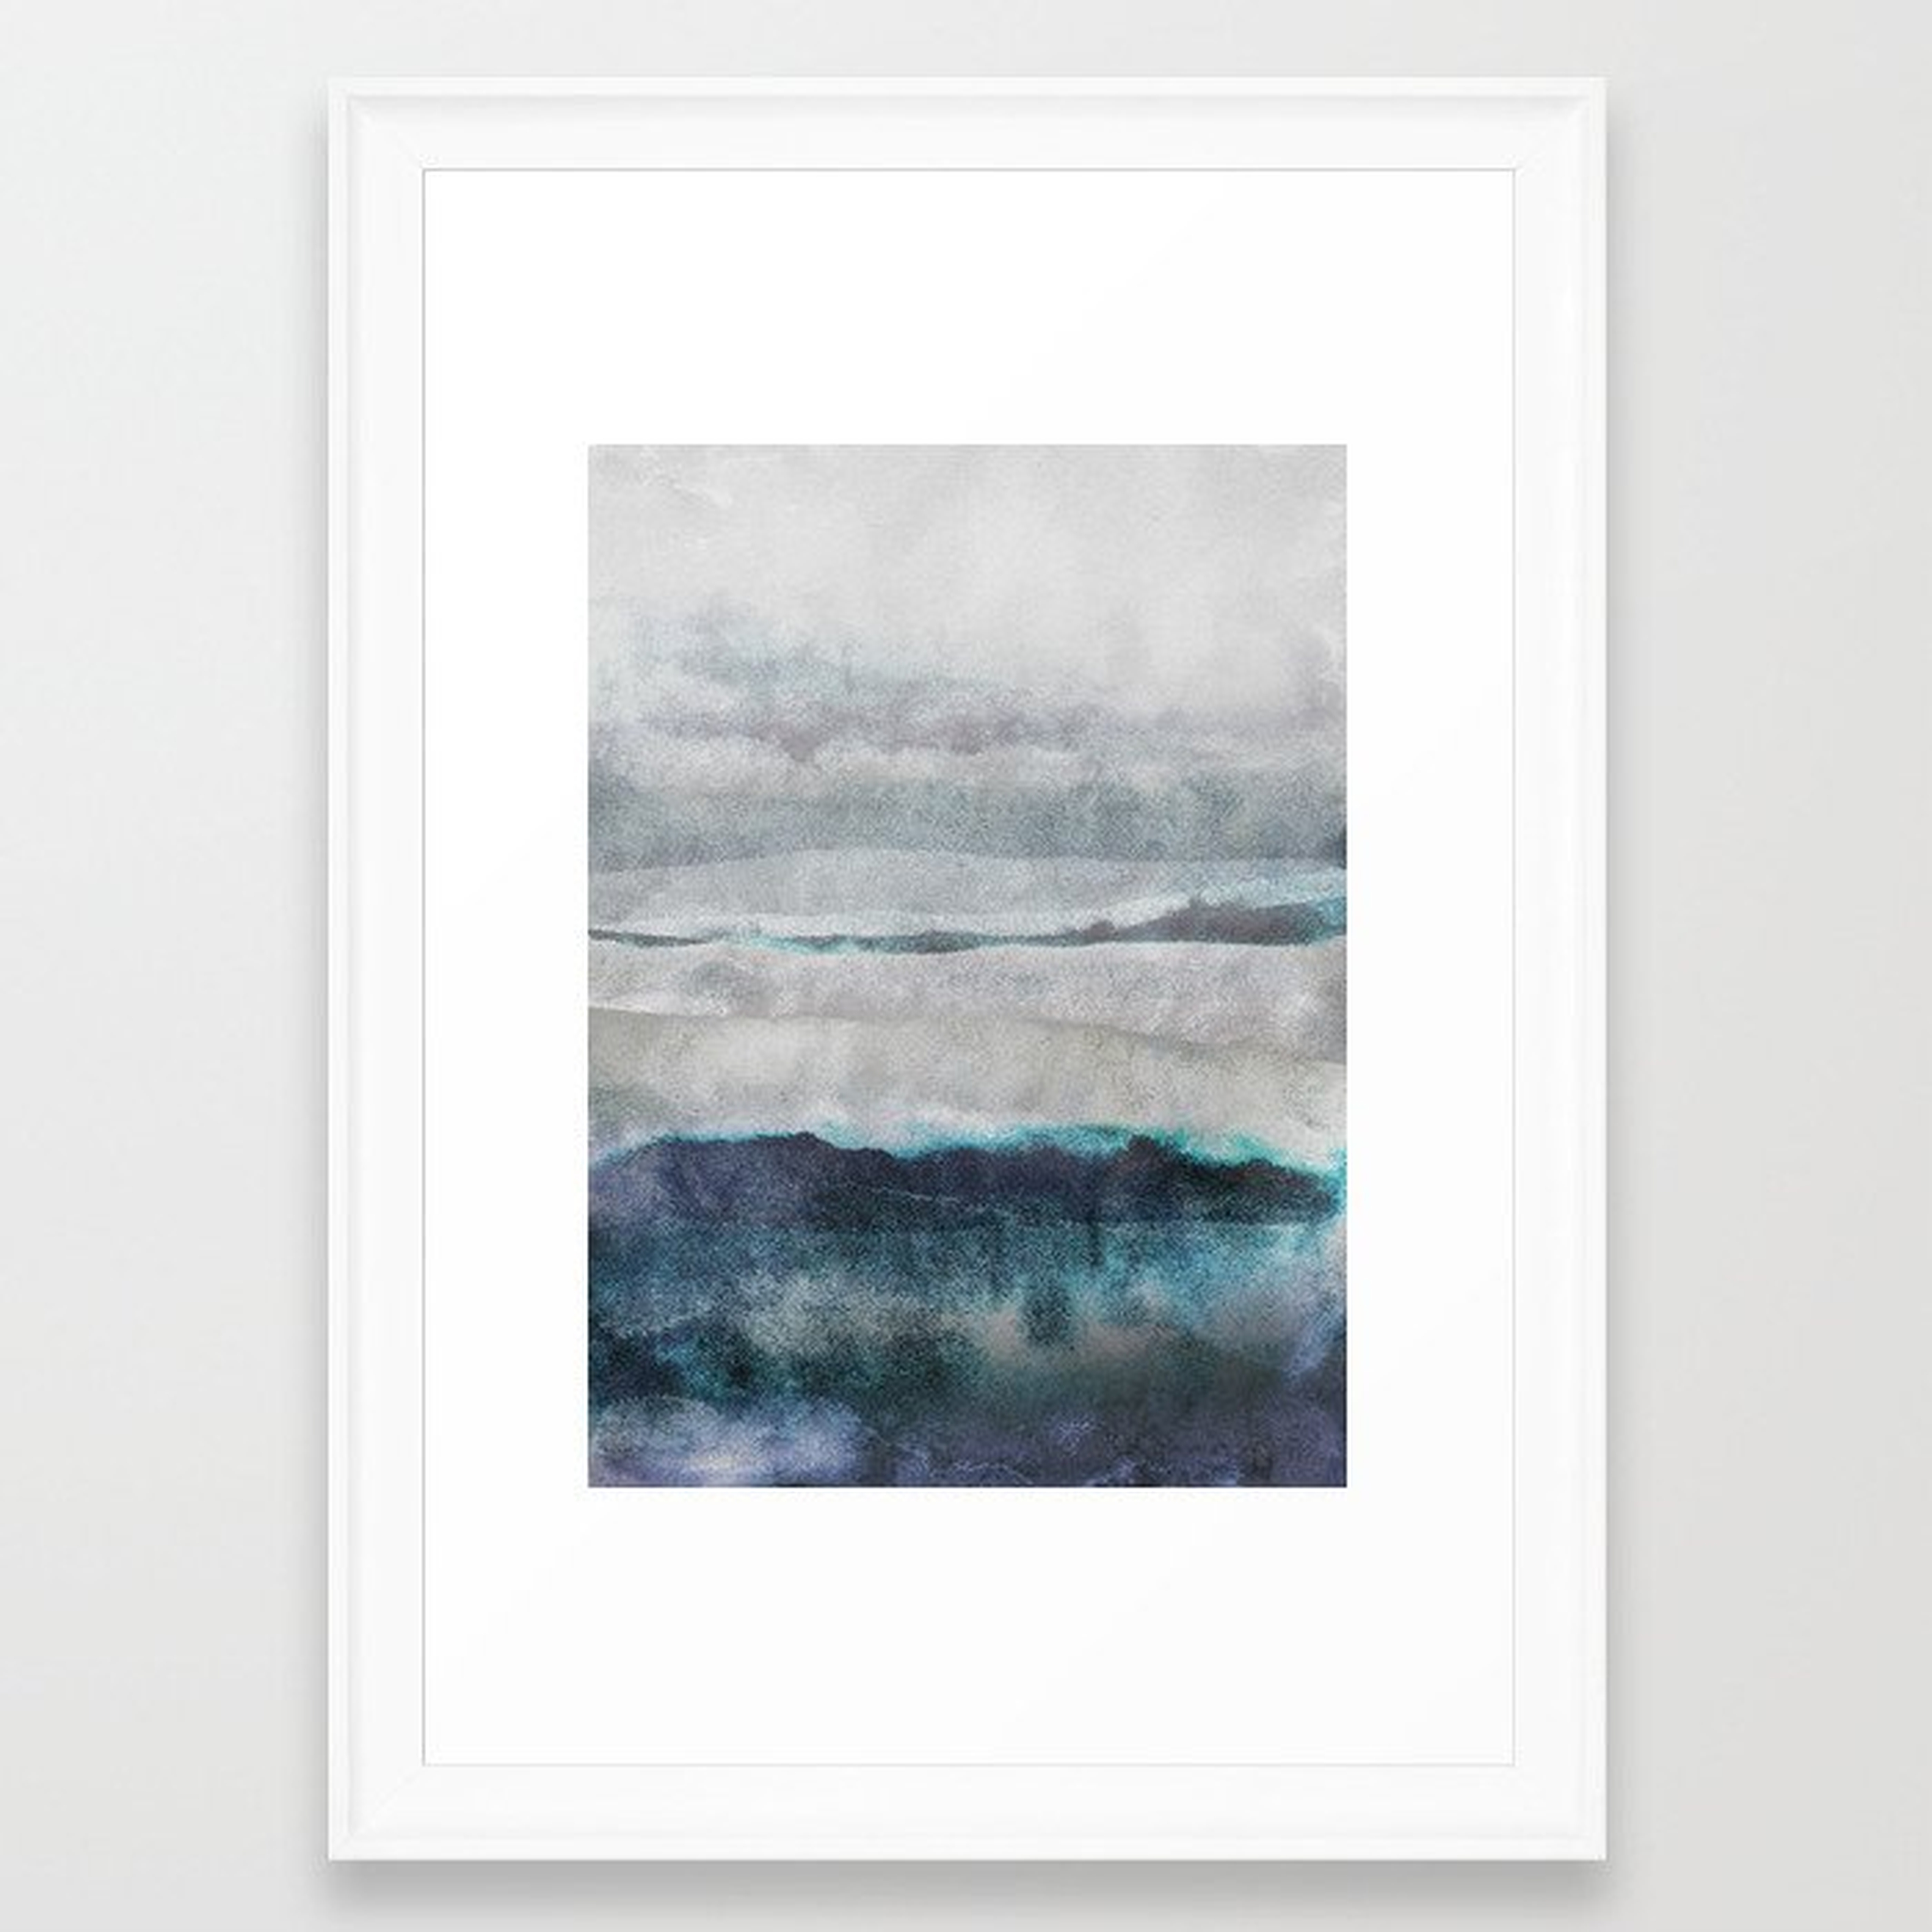 Watercolors 29 Framed Art Print by Mareike BaPhmer - Scoop White - Small 13" x 19"-15x21 - Society6